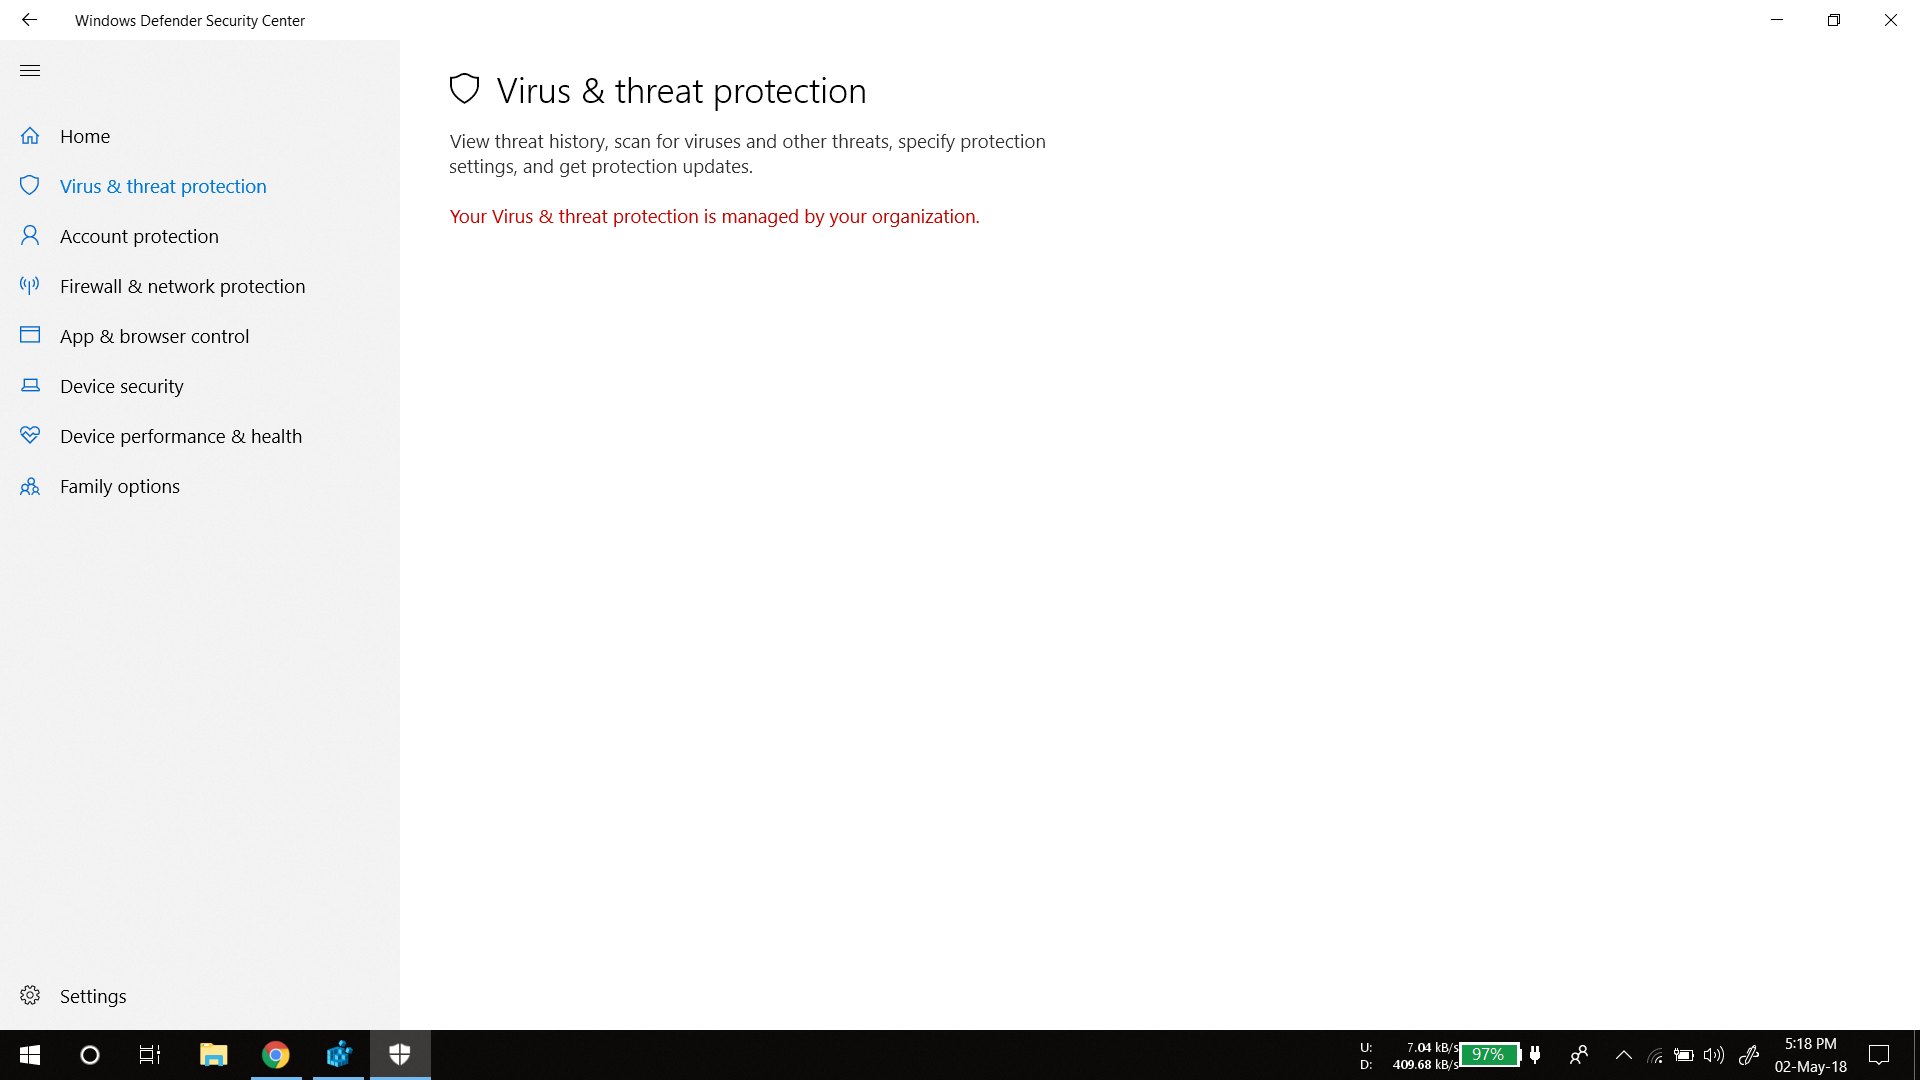 Your Virus & threat protection is managed by your organization 6408d6ee-1c20-4c97-bf4e-3622cf2cee50?upload=true.png